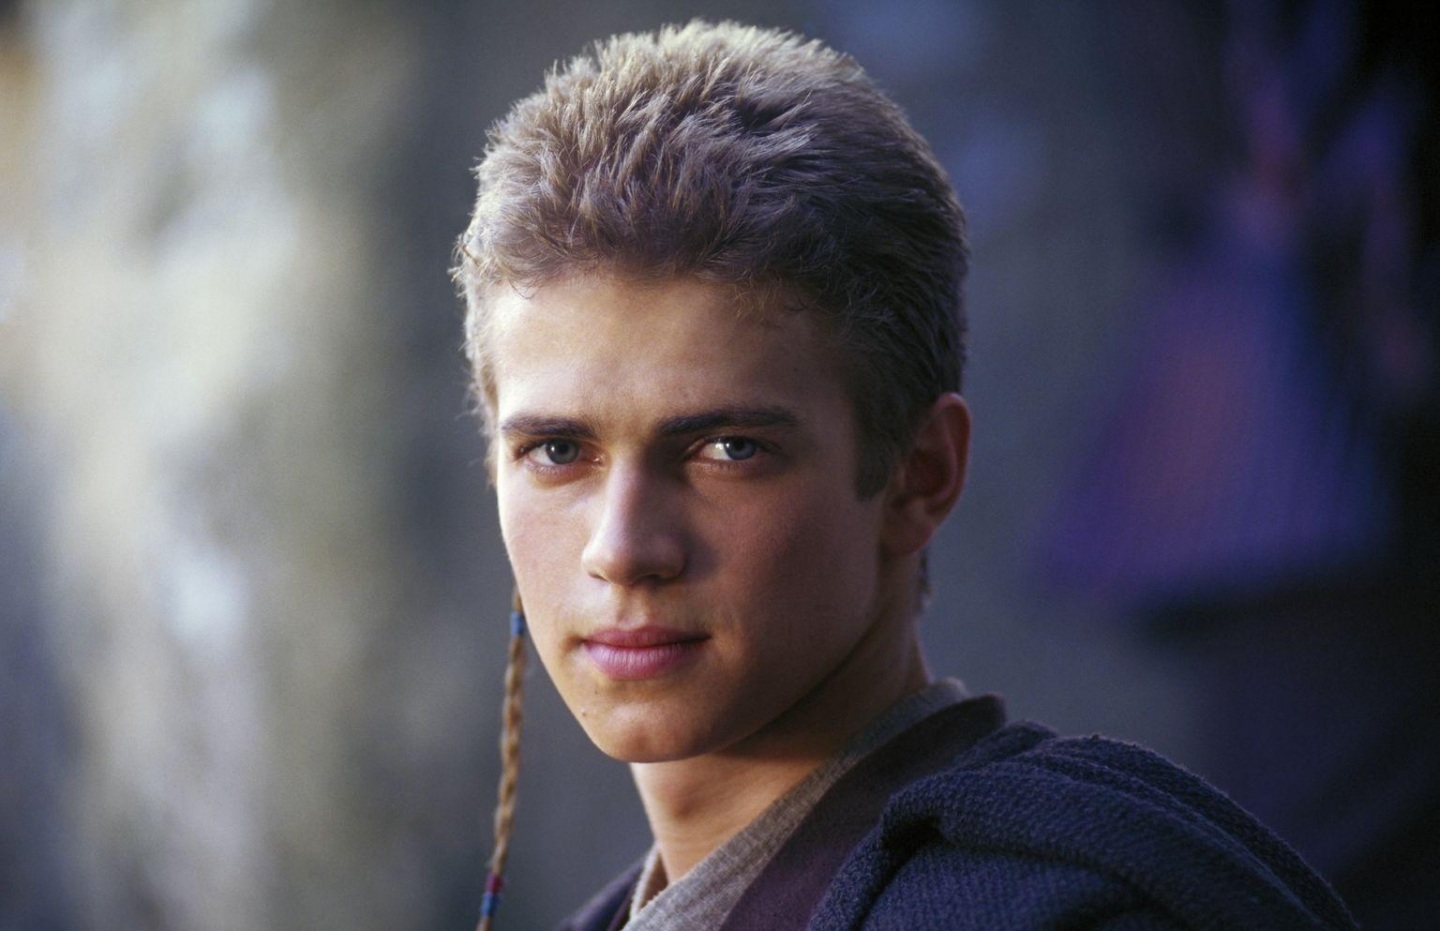 picture-of-hayden-christensen-in-star-wars-episode-ii-attack-of-the-clones-large-picture-star-wars-592127f57573a64732e95e49867550f5-large-203449